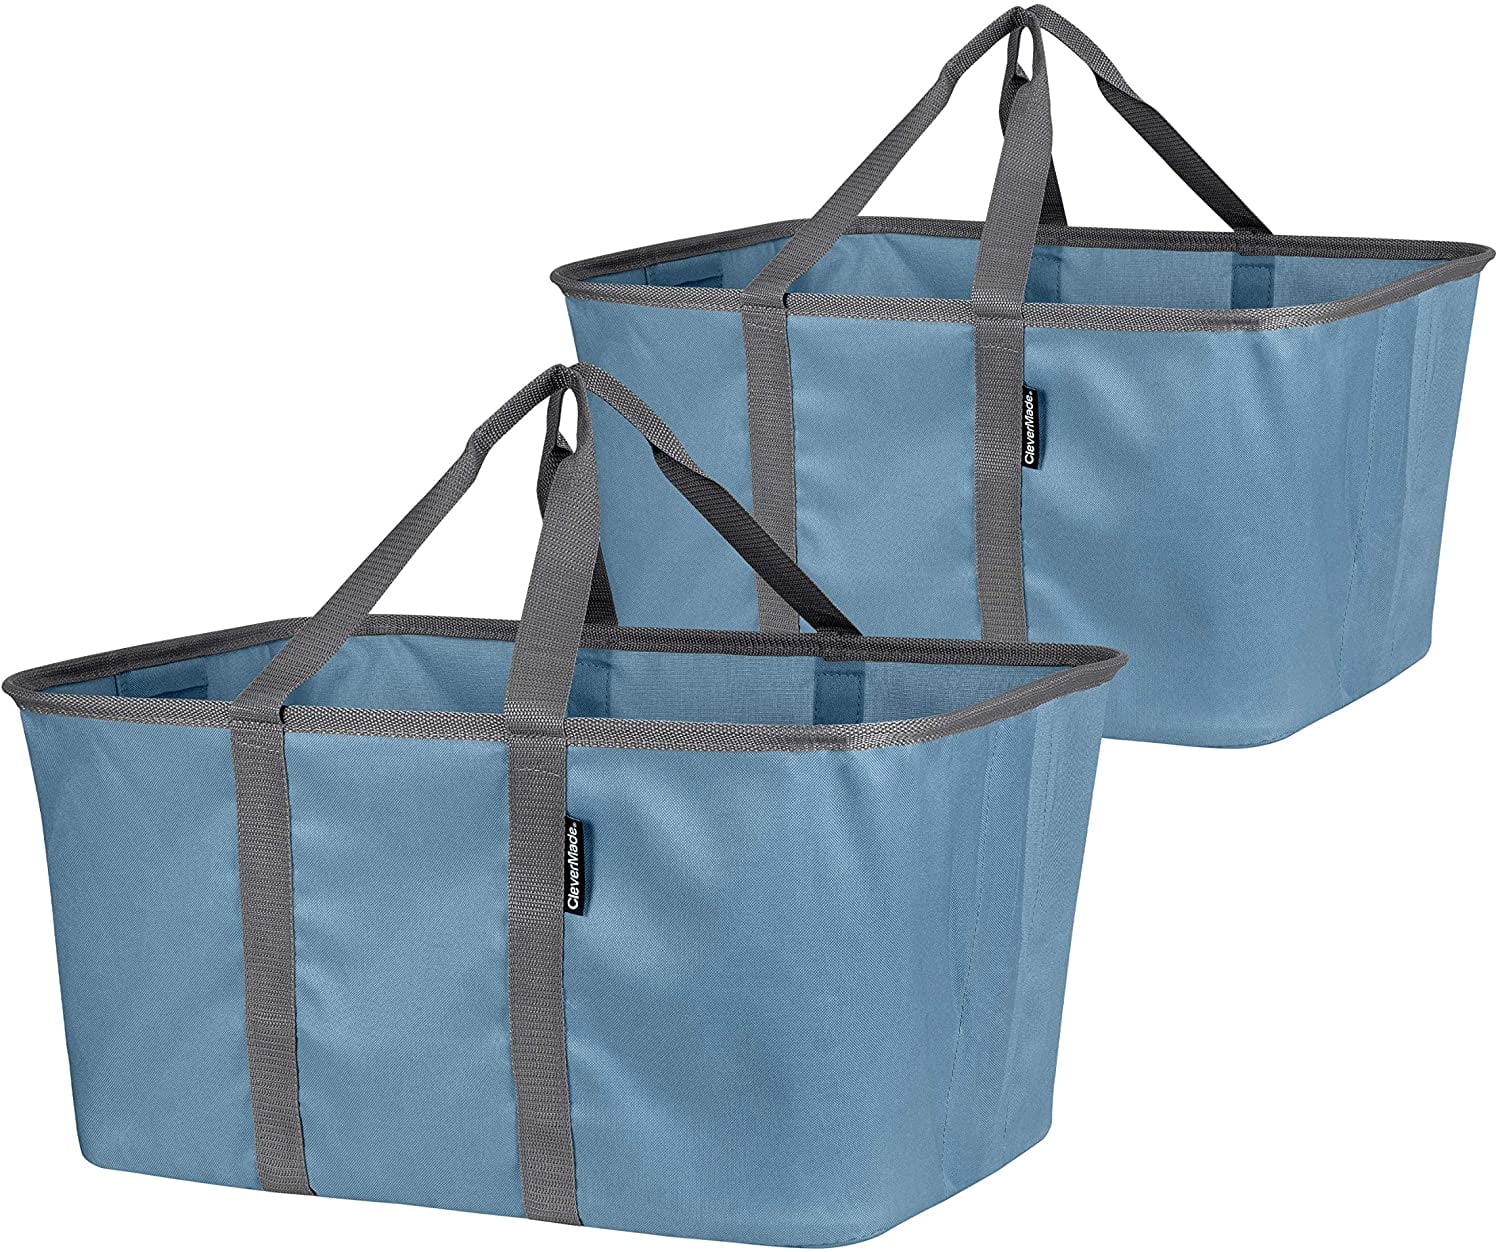 Clevermade Collapsible Fabric Laundry Basket - Foldable Pop Up Storage